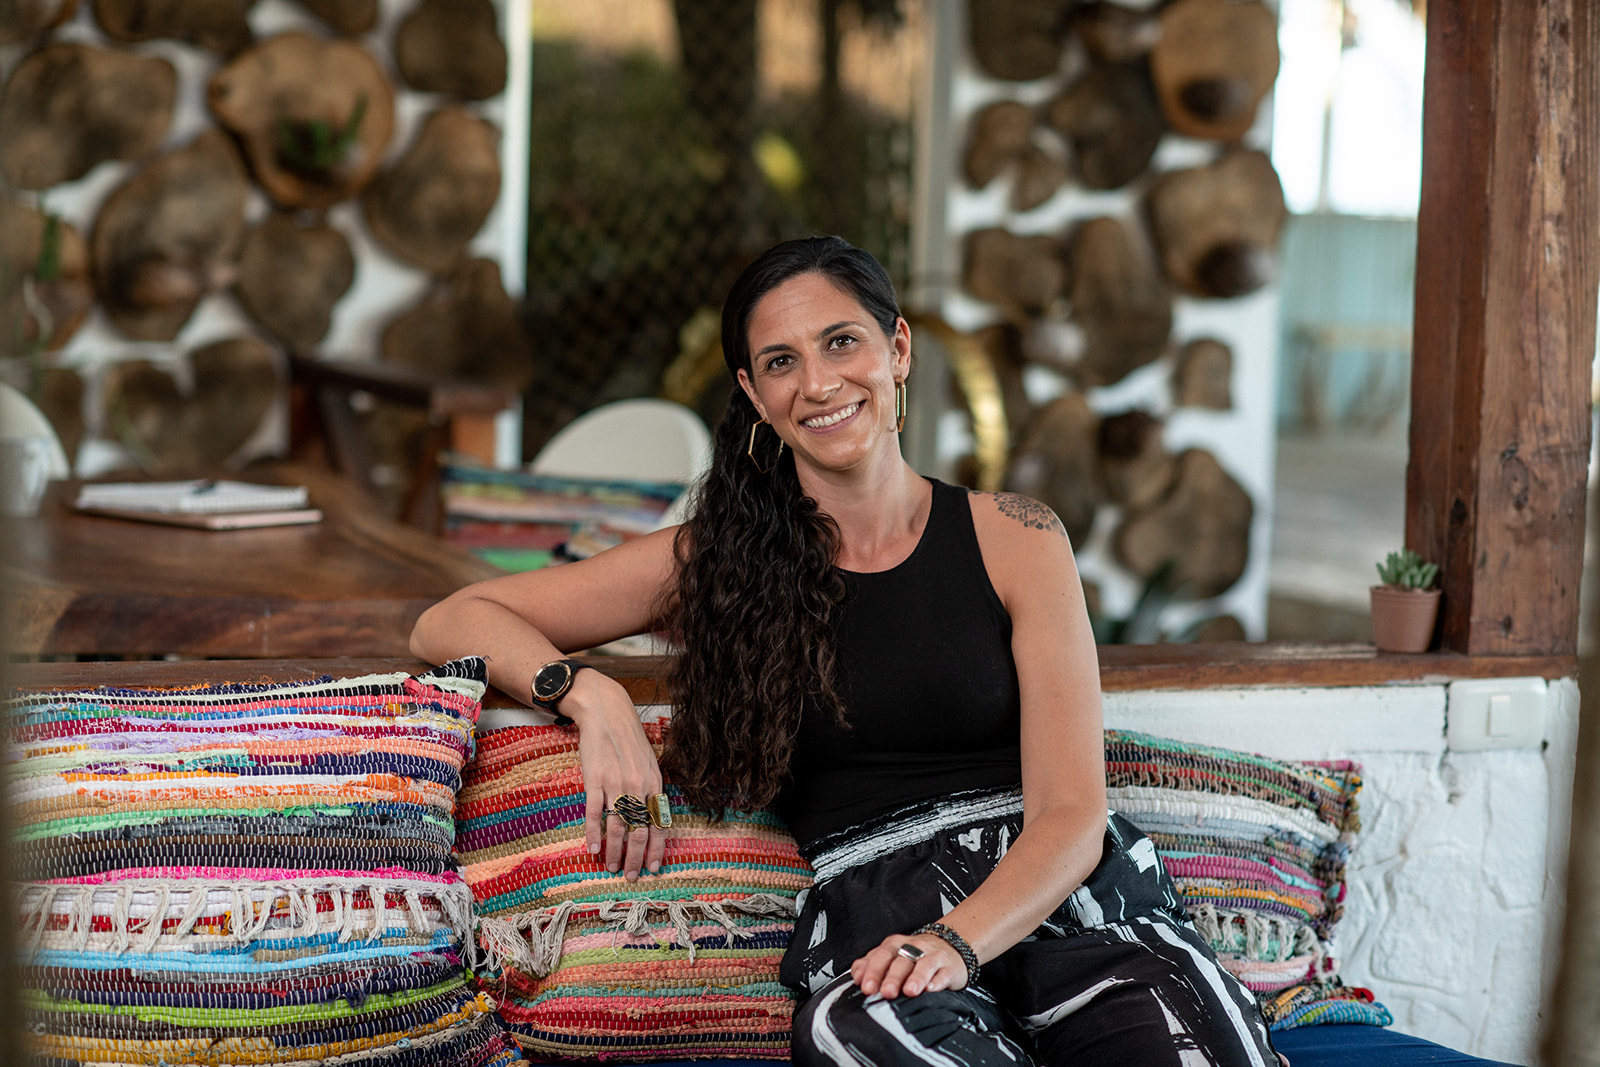 Christine Binko, a white woman and neurodivergent parenting coach, is sitting down facing the camera and smiling. Her arm is resting on vibrant multi-colored striped pillows. She's wearing a black tank top with black and white paperbag bands pants. She has long, dark brown curly hair in a low ponyail and gold hexagon hoop earrings. The background is blurred.